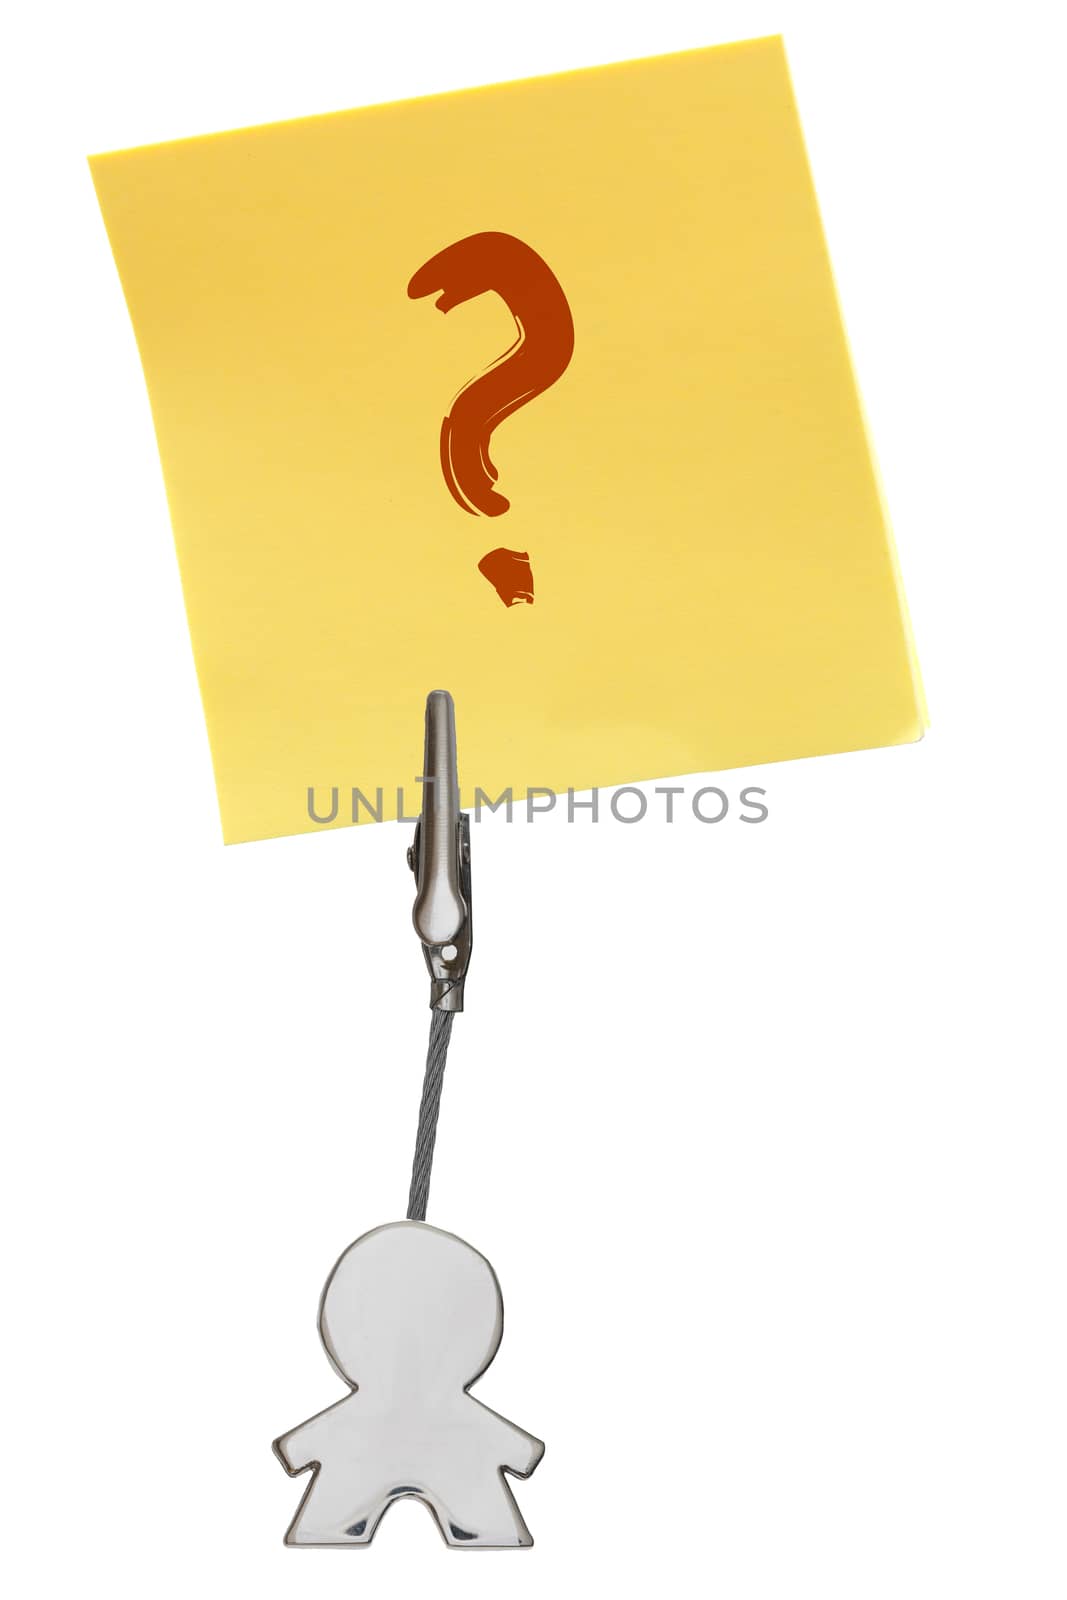 Man Figure Business Card Holder with clip holding a yellow paper note QUESTIONMARK; isolated on white background, customizable